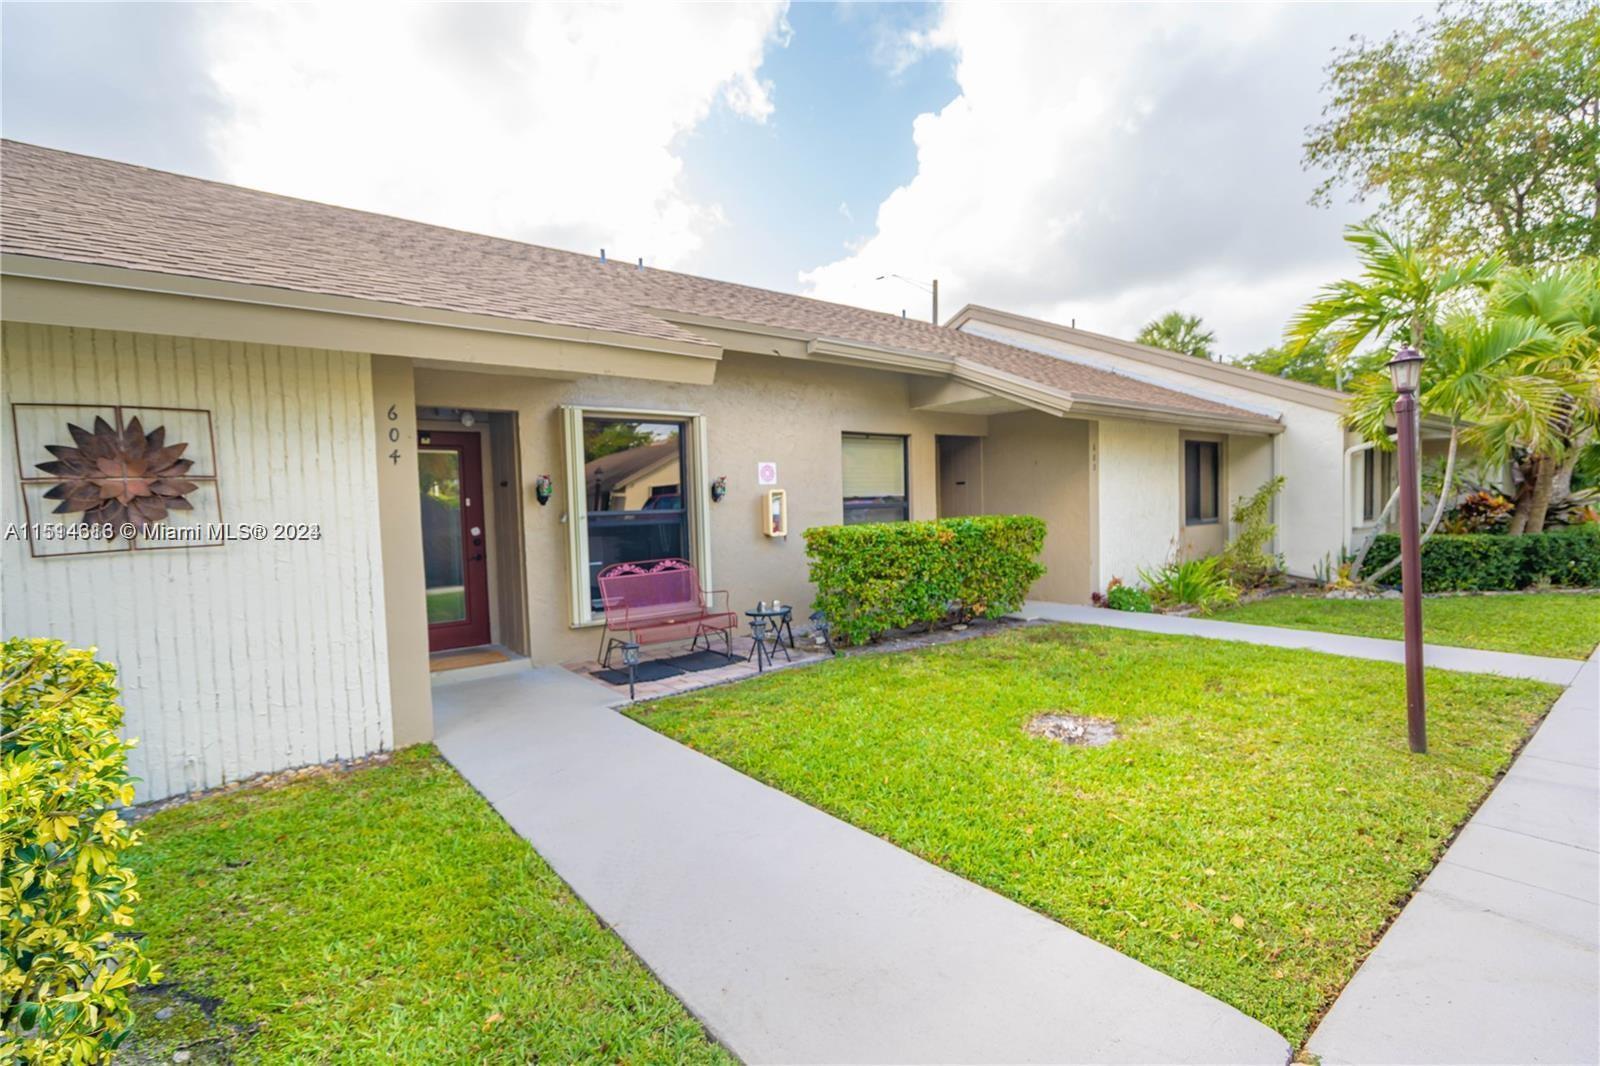 Photo of 3078 S Oakland Forest Dr #604 in Oakland Park, FL